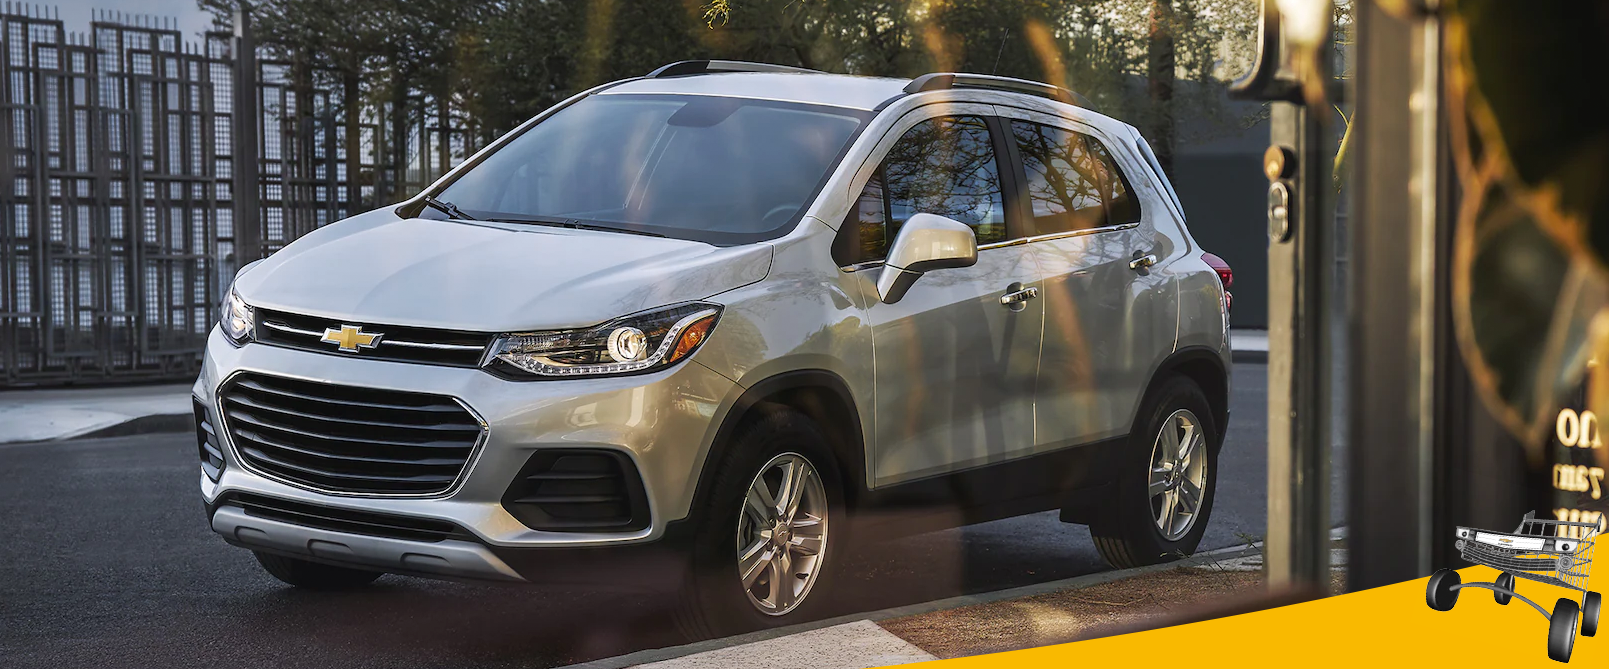 Top 5 Features You Must Have in the New 2021 Chevy Trax